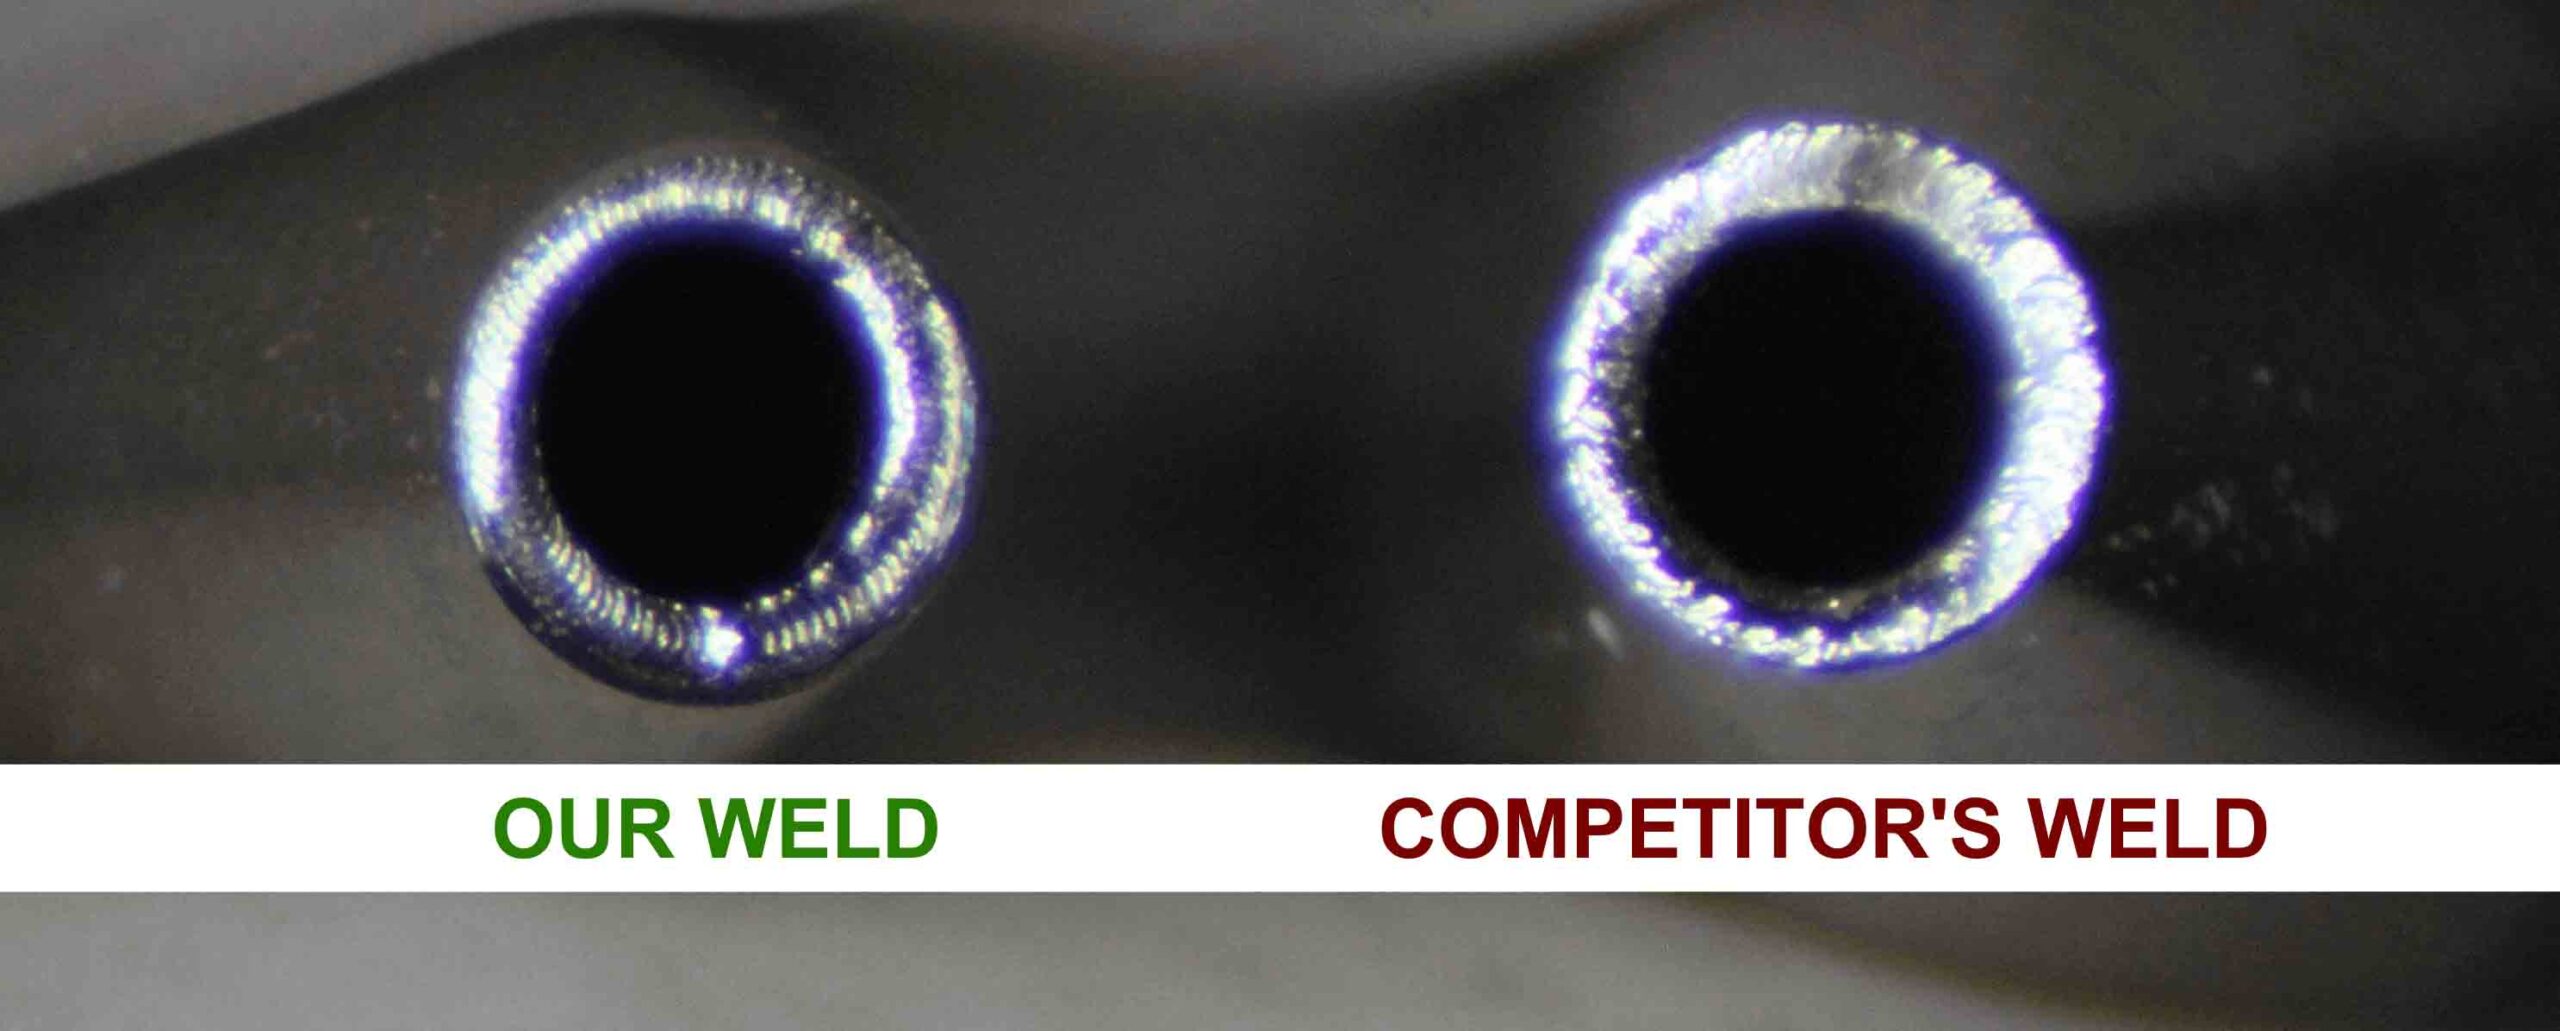 up close comparison image of two similar welds, one is a competitors with shoddy welding and ours shows a clean weld